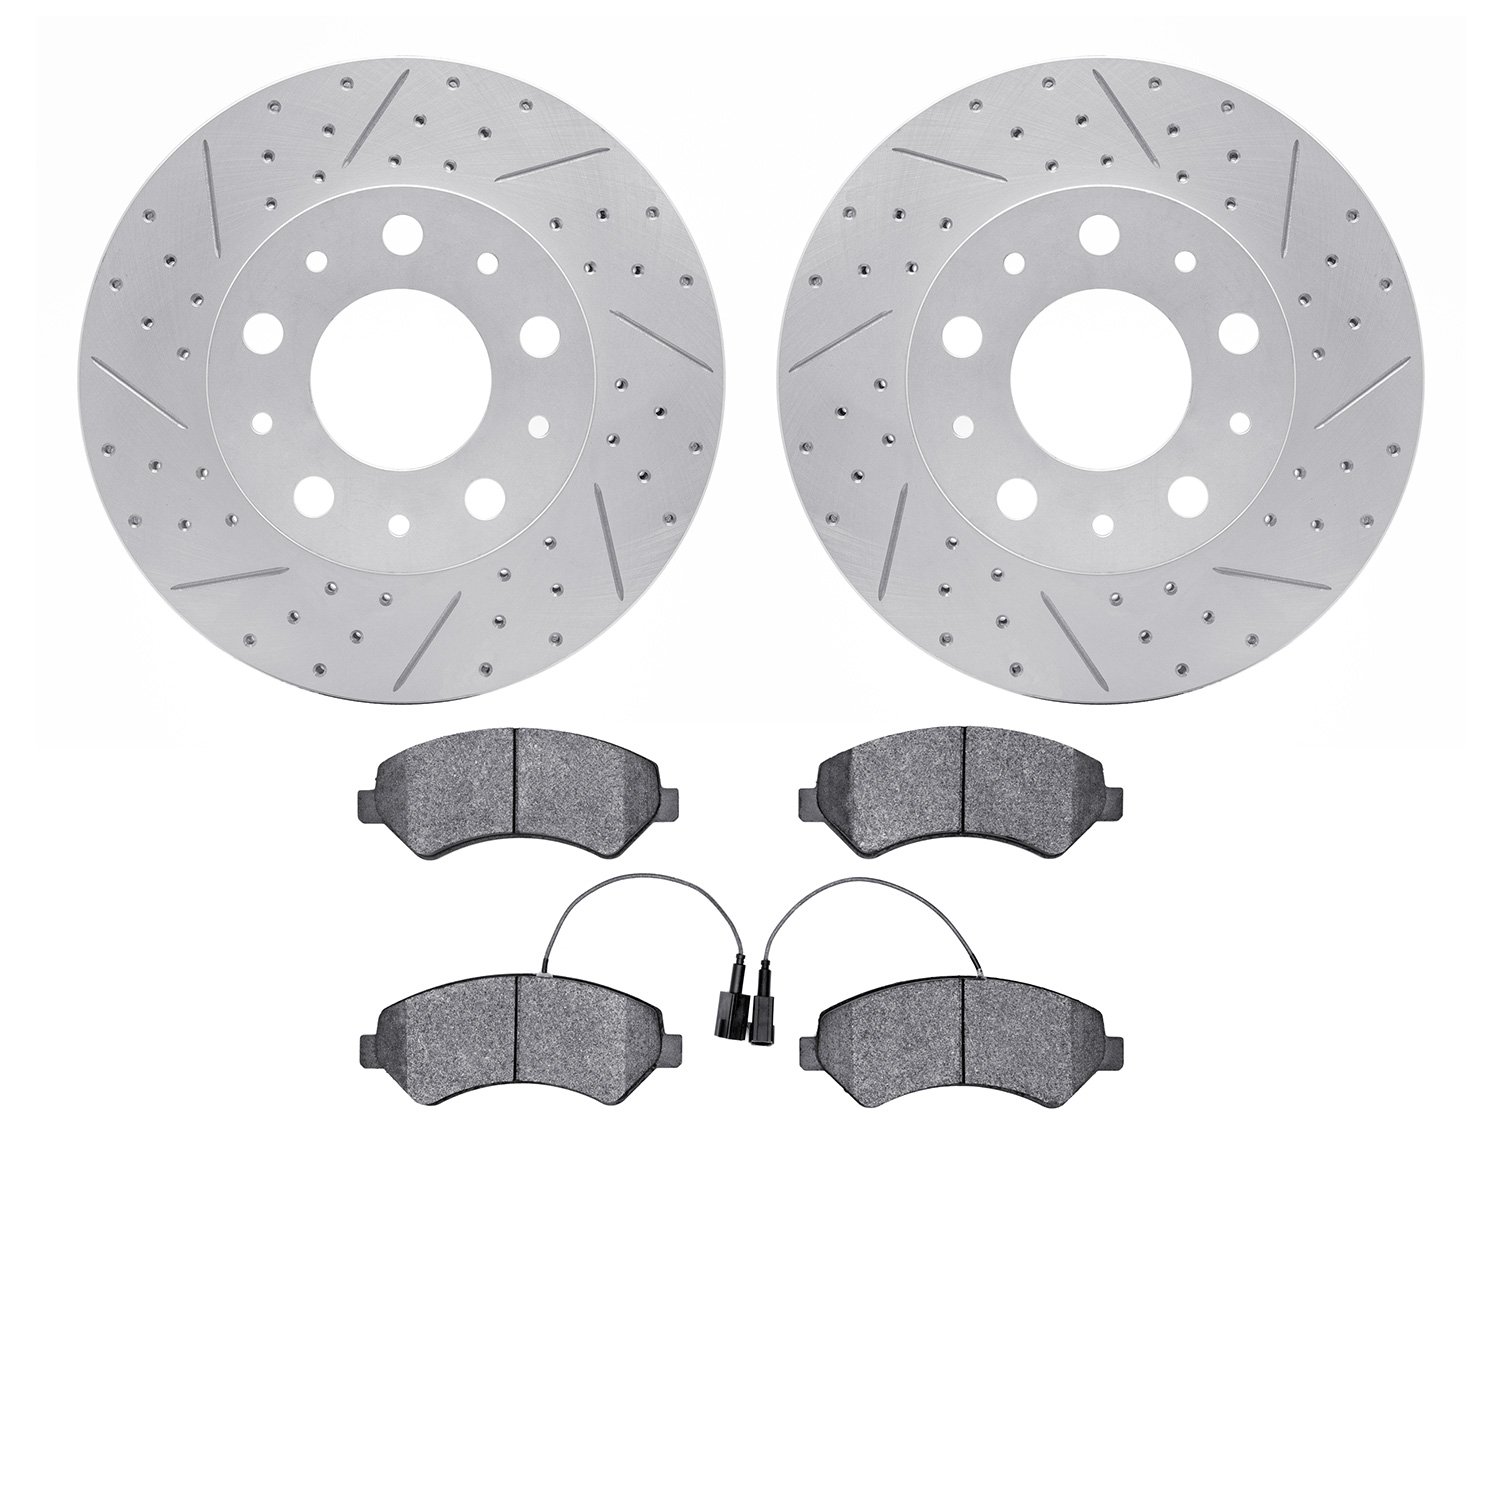 2502-40071 Geoperformance Drilled/Slotted Rotors w/5000 Advanced Brake Pads Kit, Fits Select Mopar, Position: Front